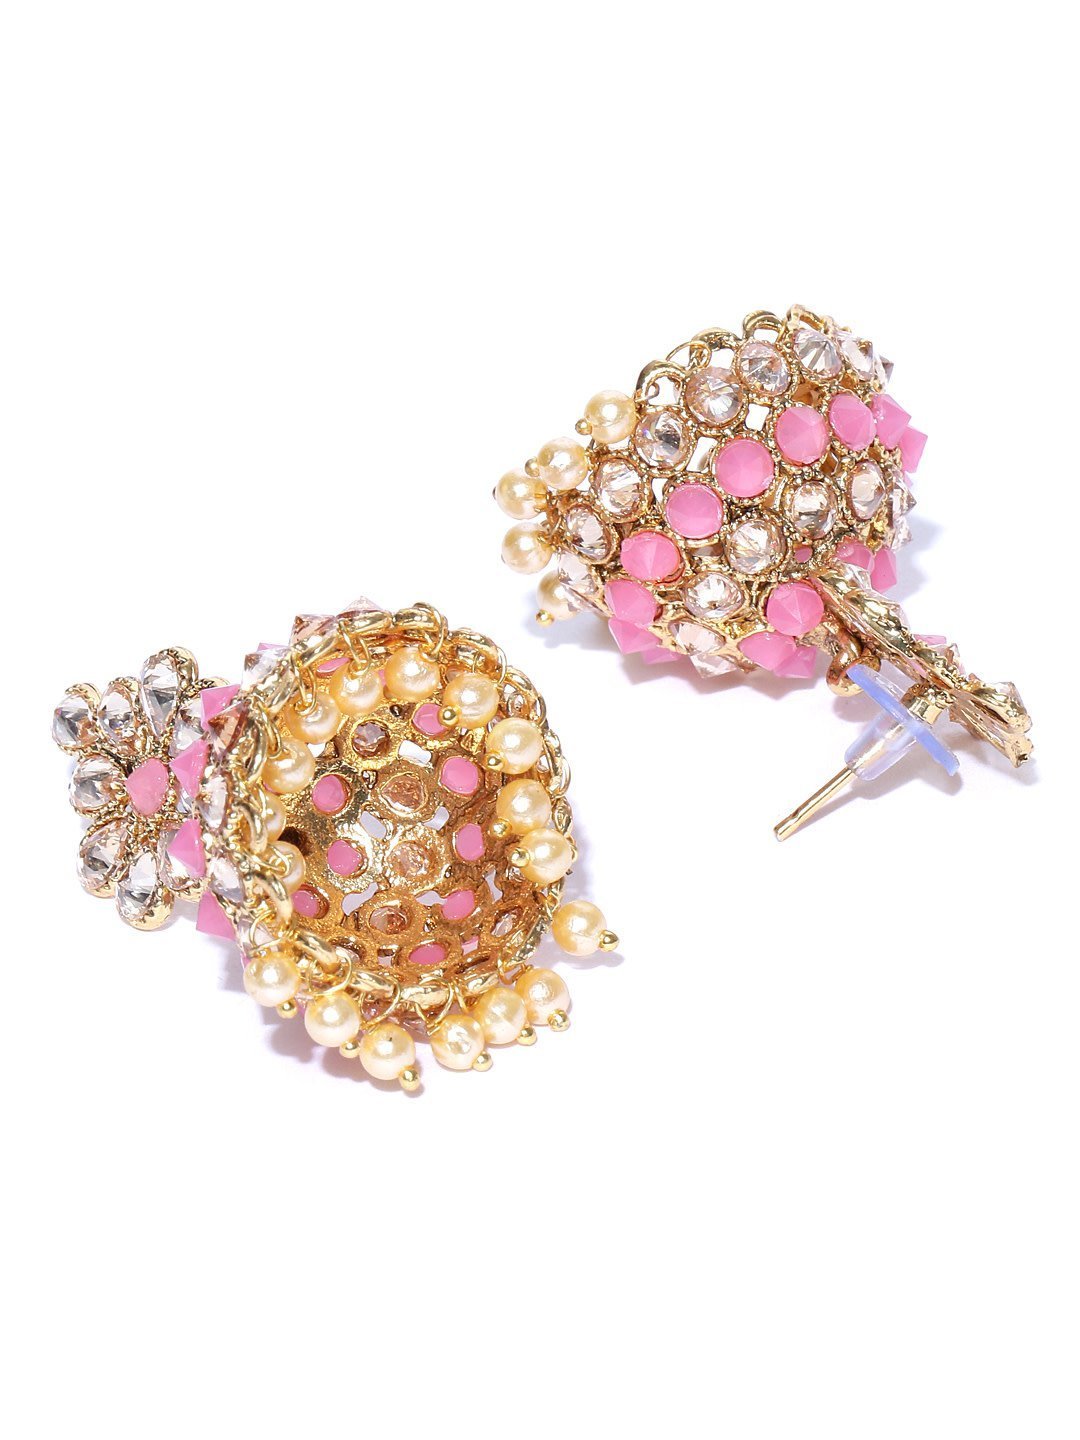 Women's Pink Gold-Plated Stones Studded Floral Patterned Jhumka Earrings in Pink and White Color - Priyaasi